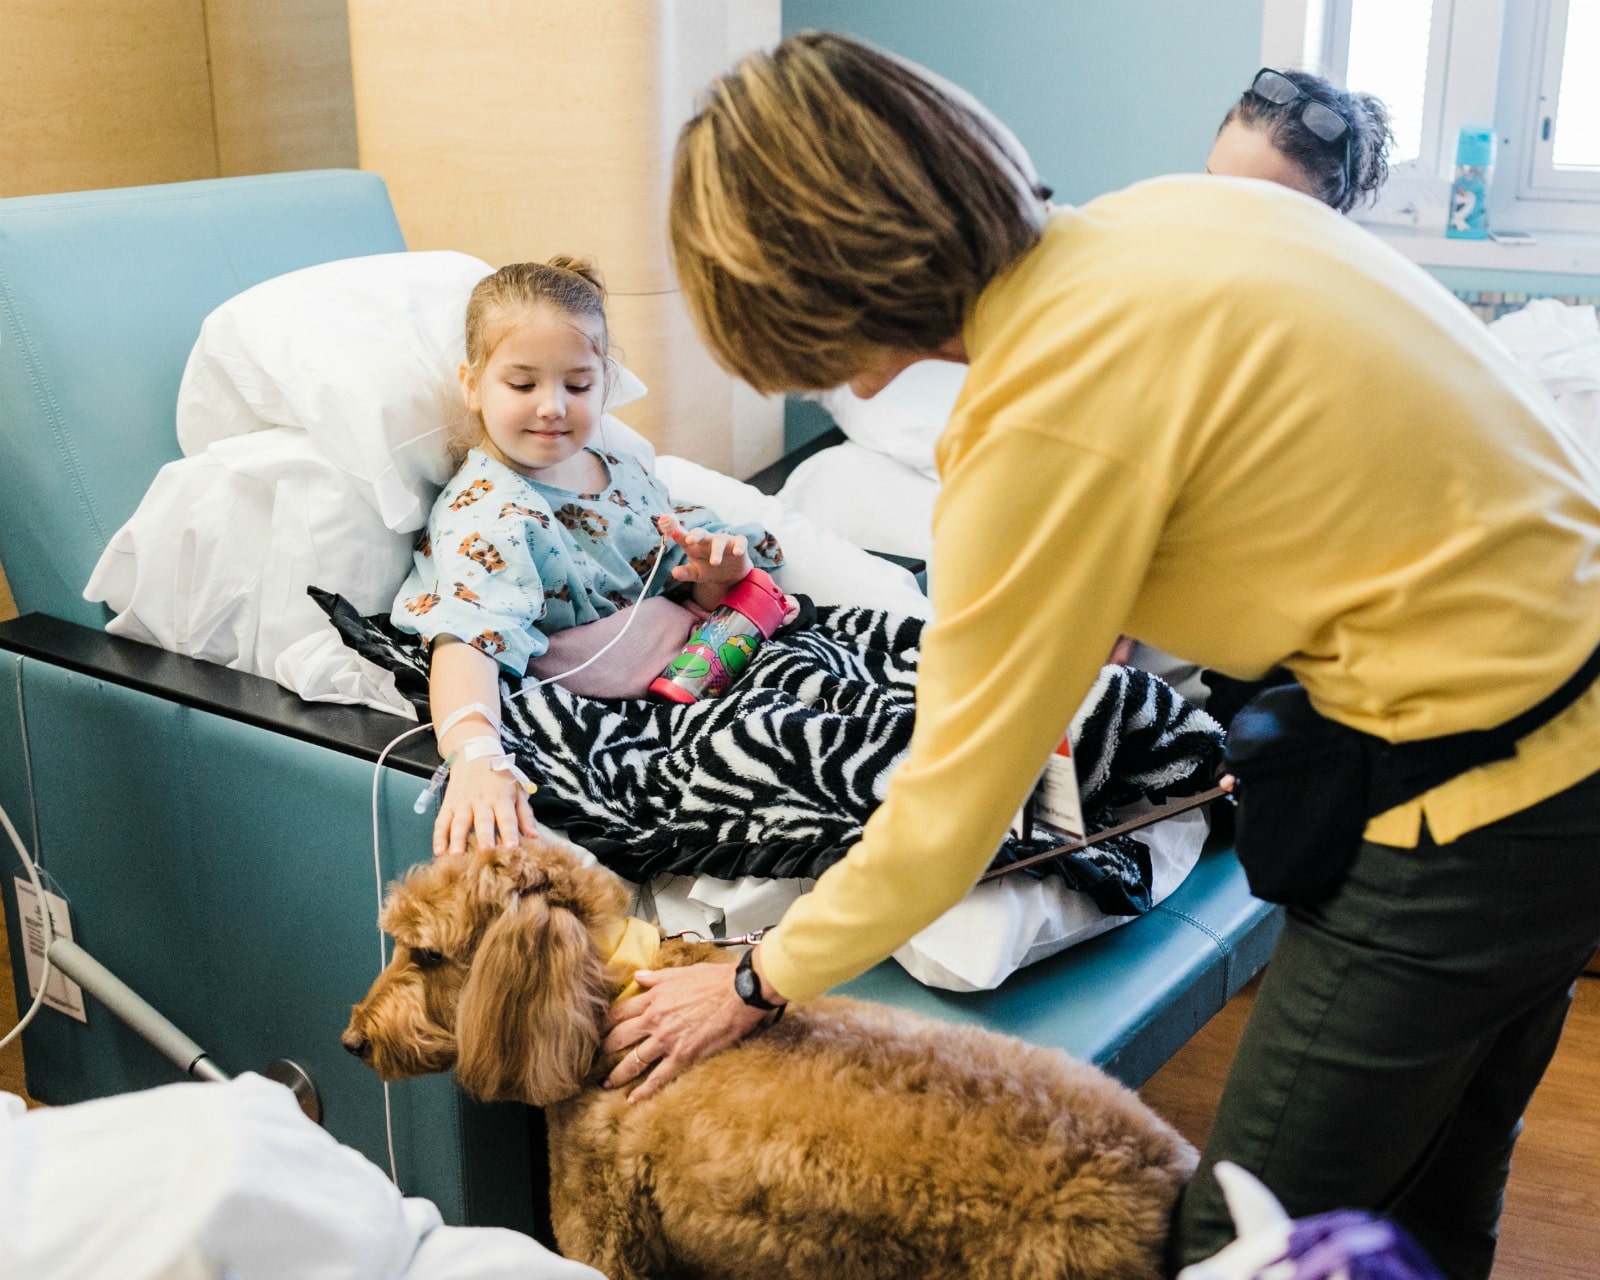 Animal-Assisted Therapy brings fun, connection, and happiness to hospital stays